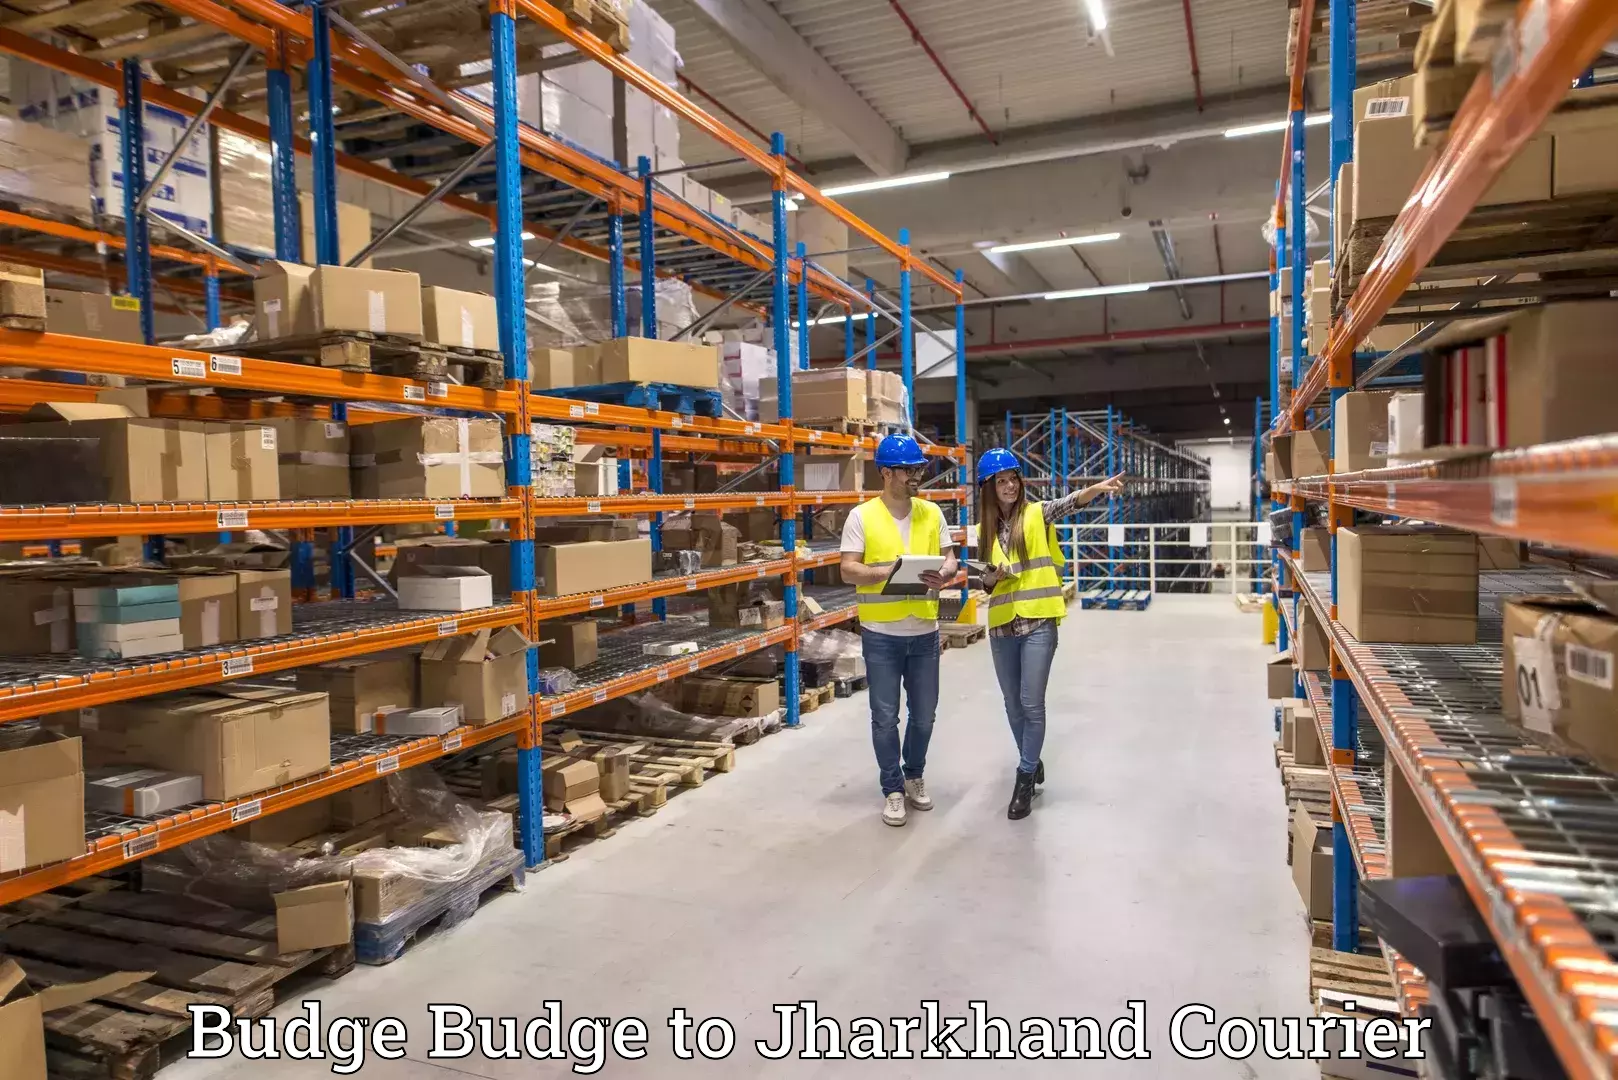 Efficient order fulfillment in Budge Budge to Jharkhand